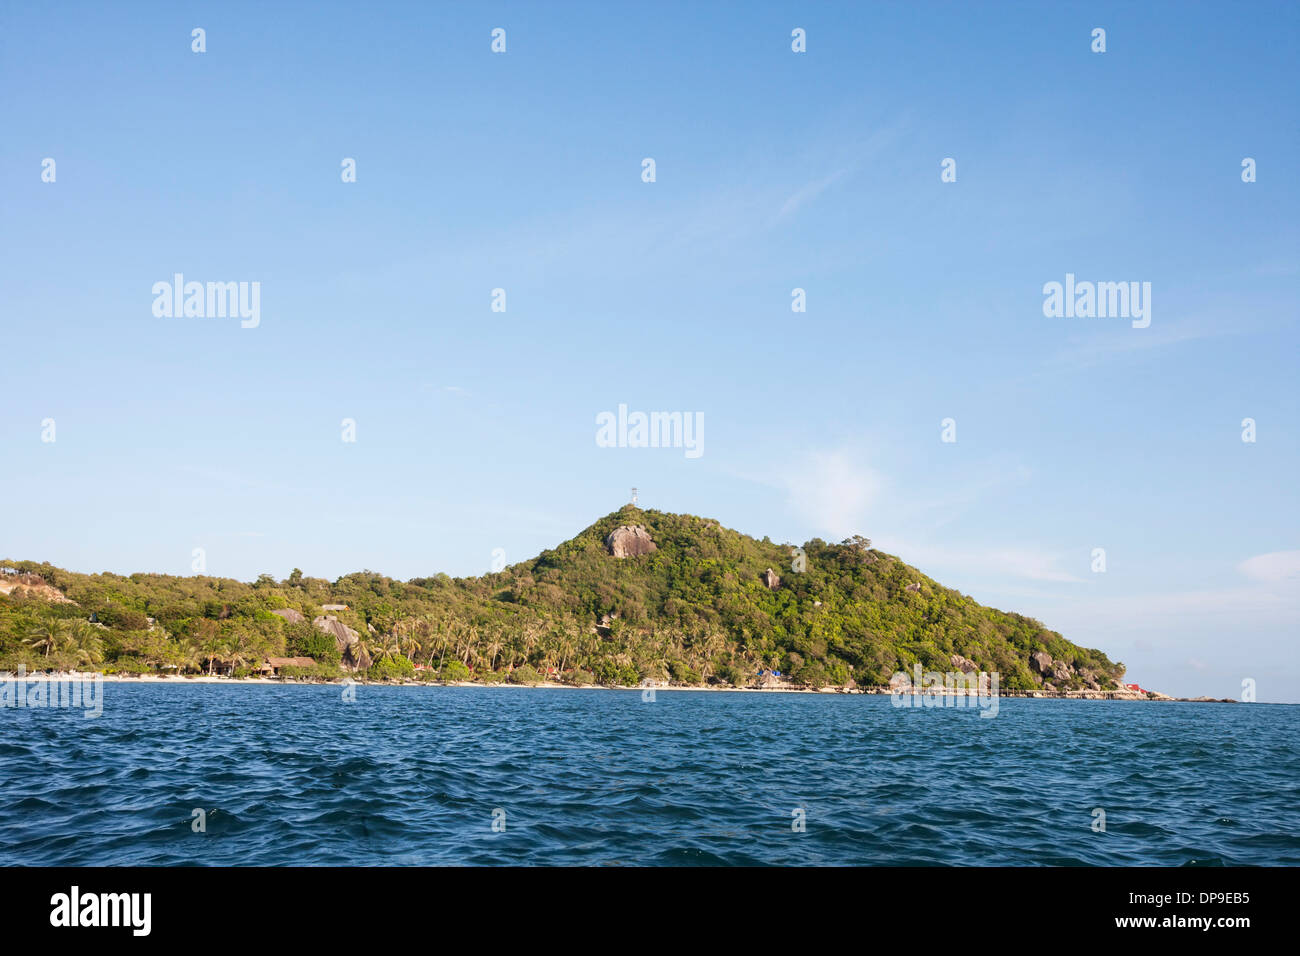 Seascape with island in background  Koh Pha Ngan  Thailand Stock Photo